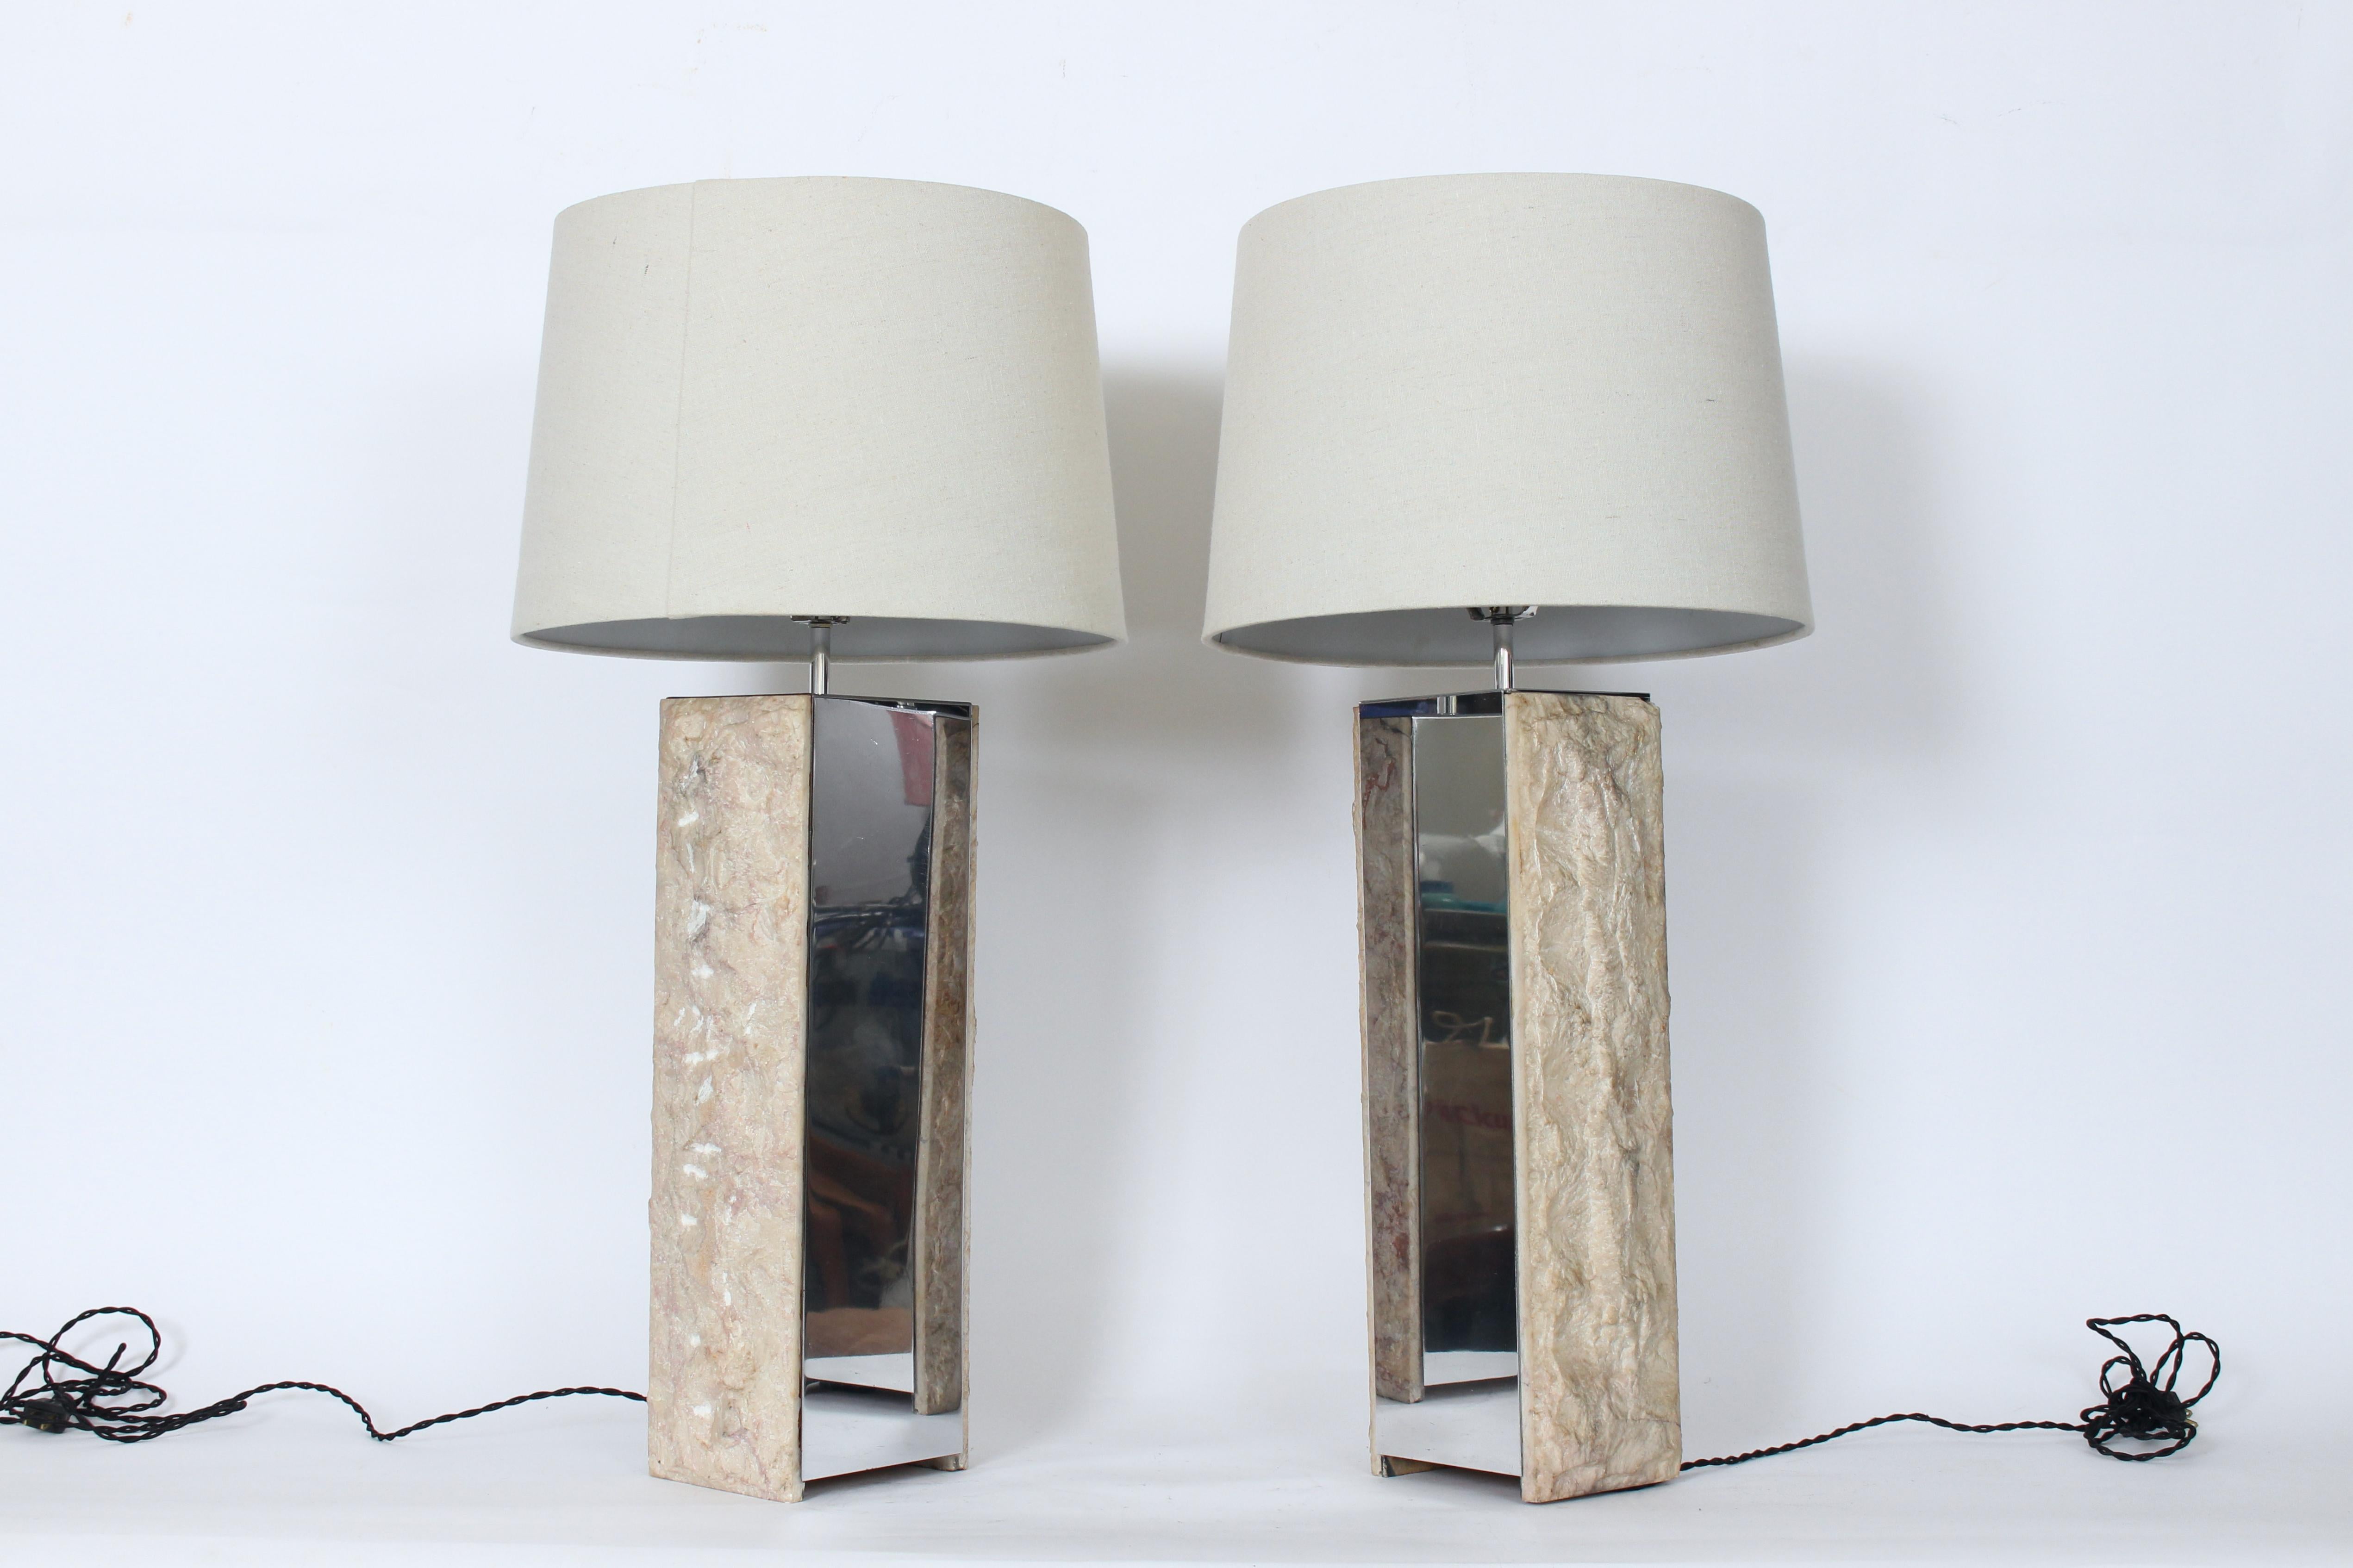 American Substantial Pair of Laurel Italian Rough Cut Marble & Polished Metal Table Lamps For Sale